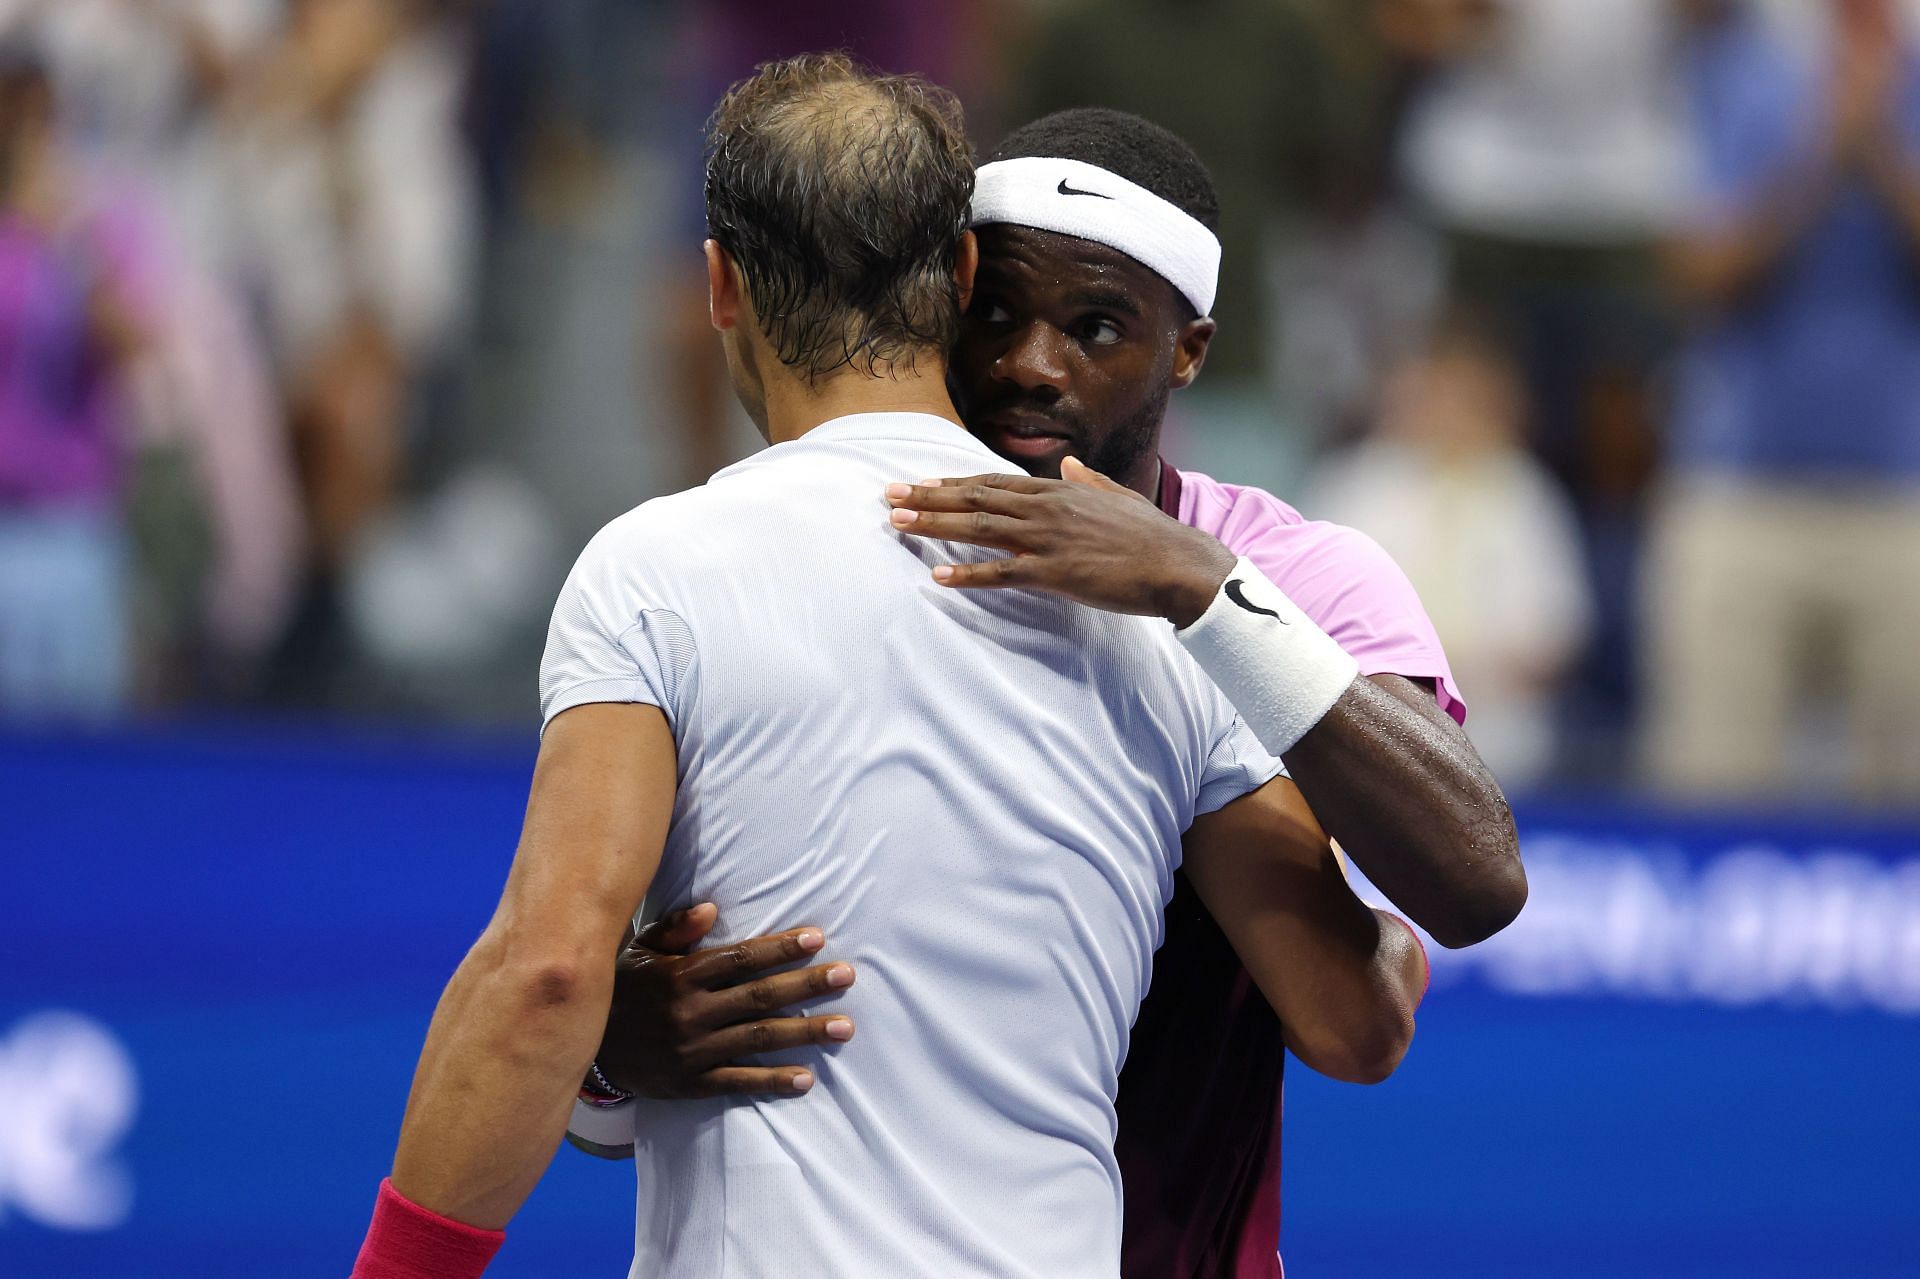 Nadal and Tiafoe at the 2022 US Open - Day 8